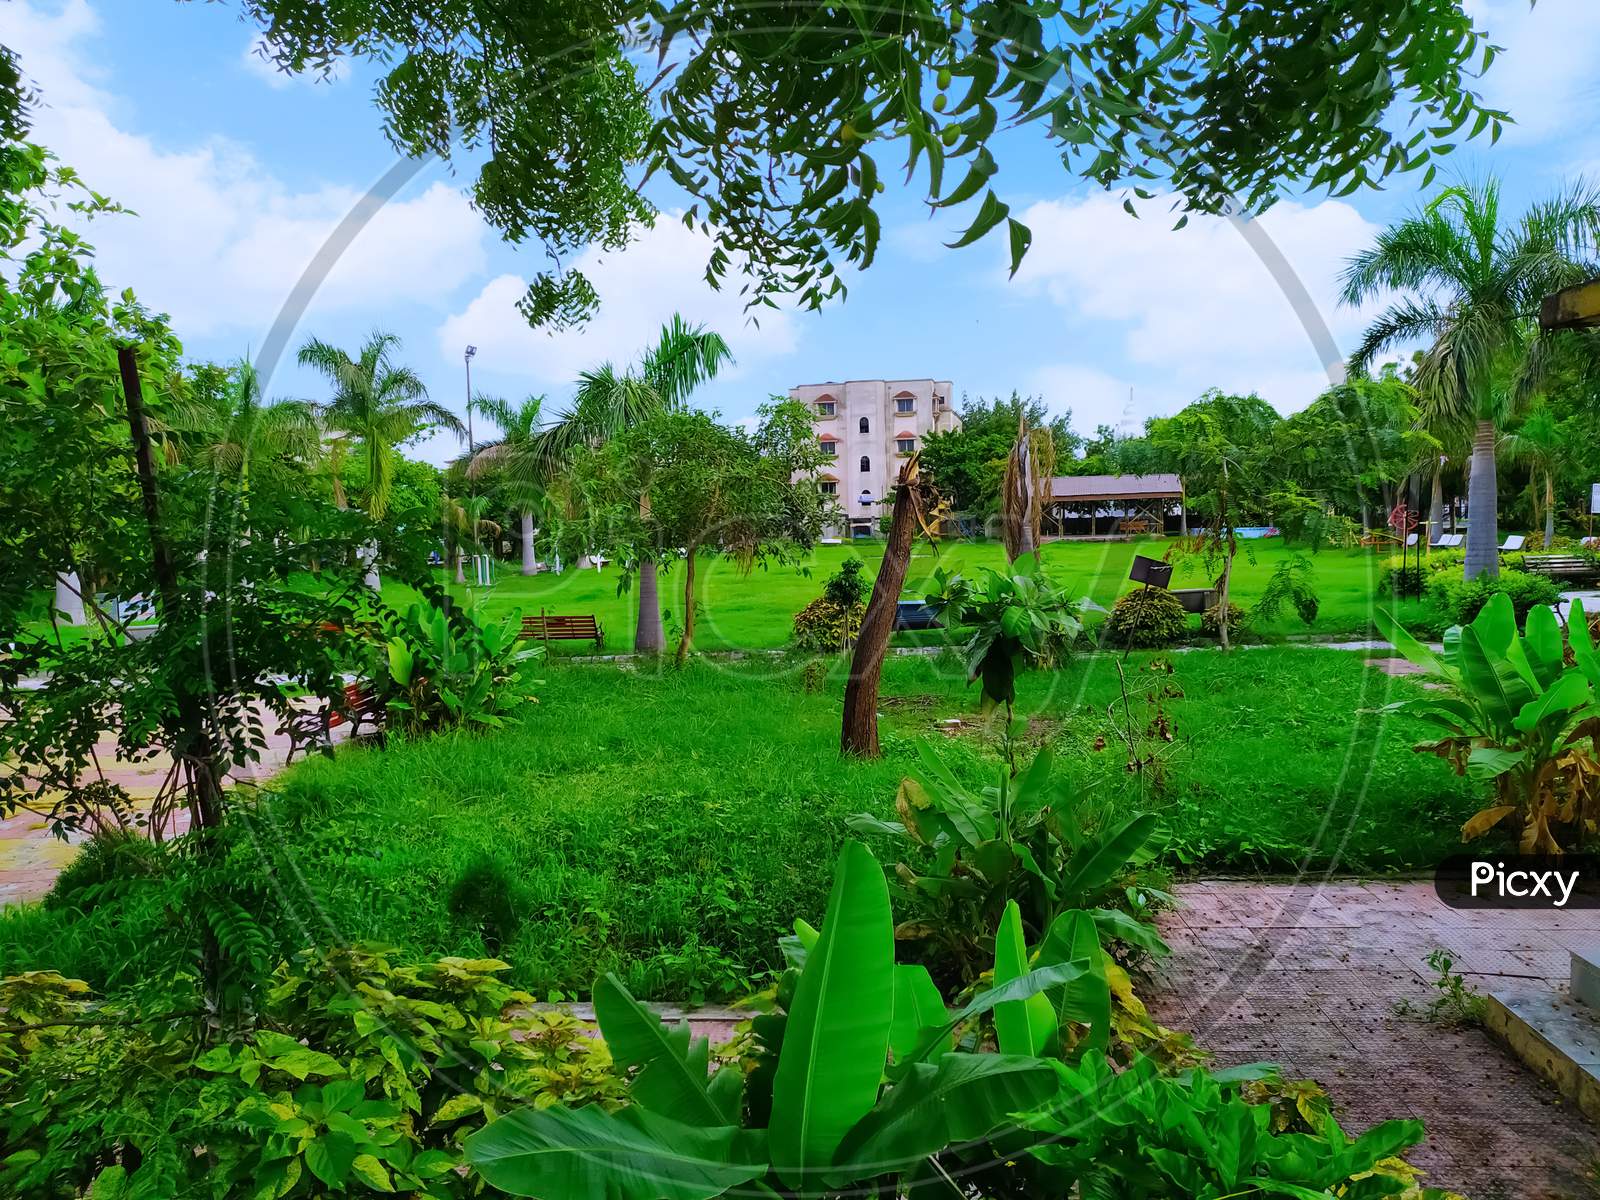 The garden is surrounded by palm trees and other trees and there is greenery in the garden during the rainy season.